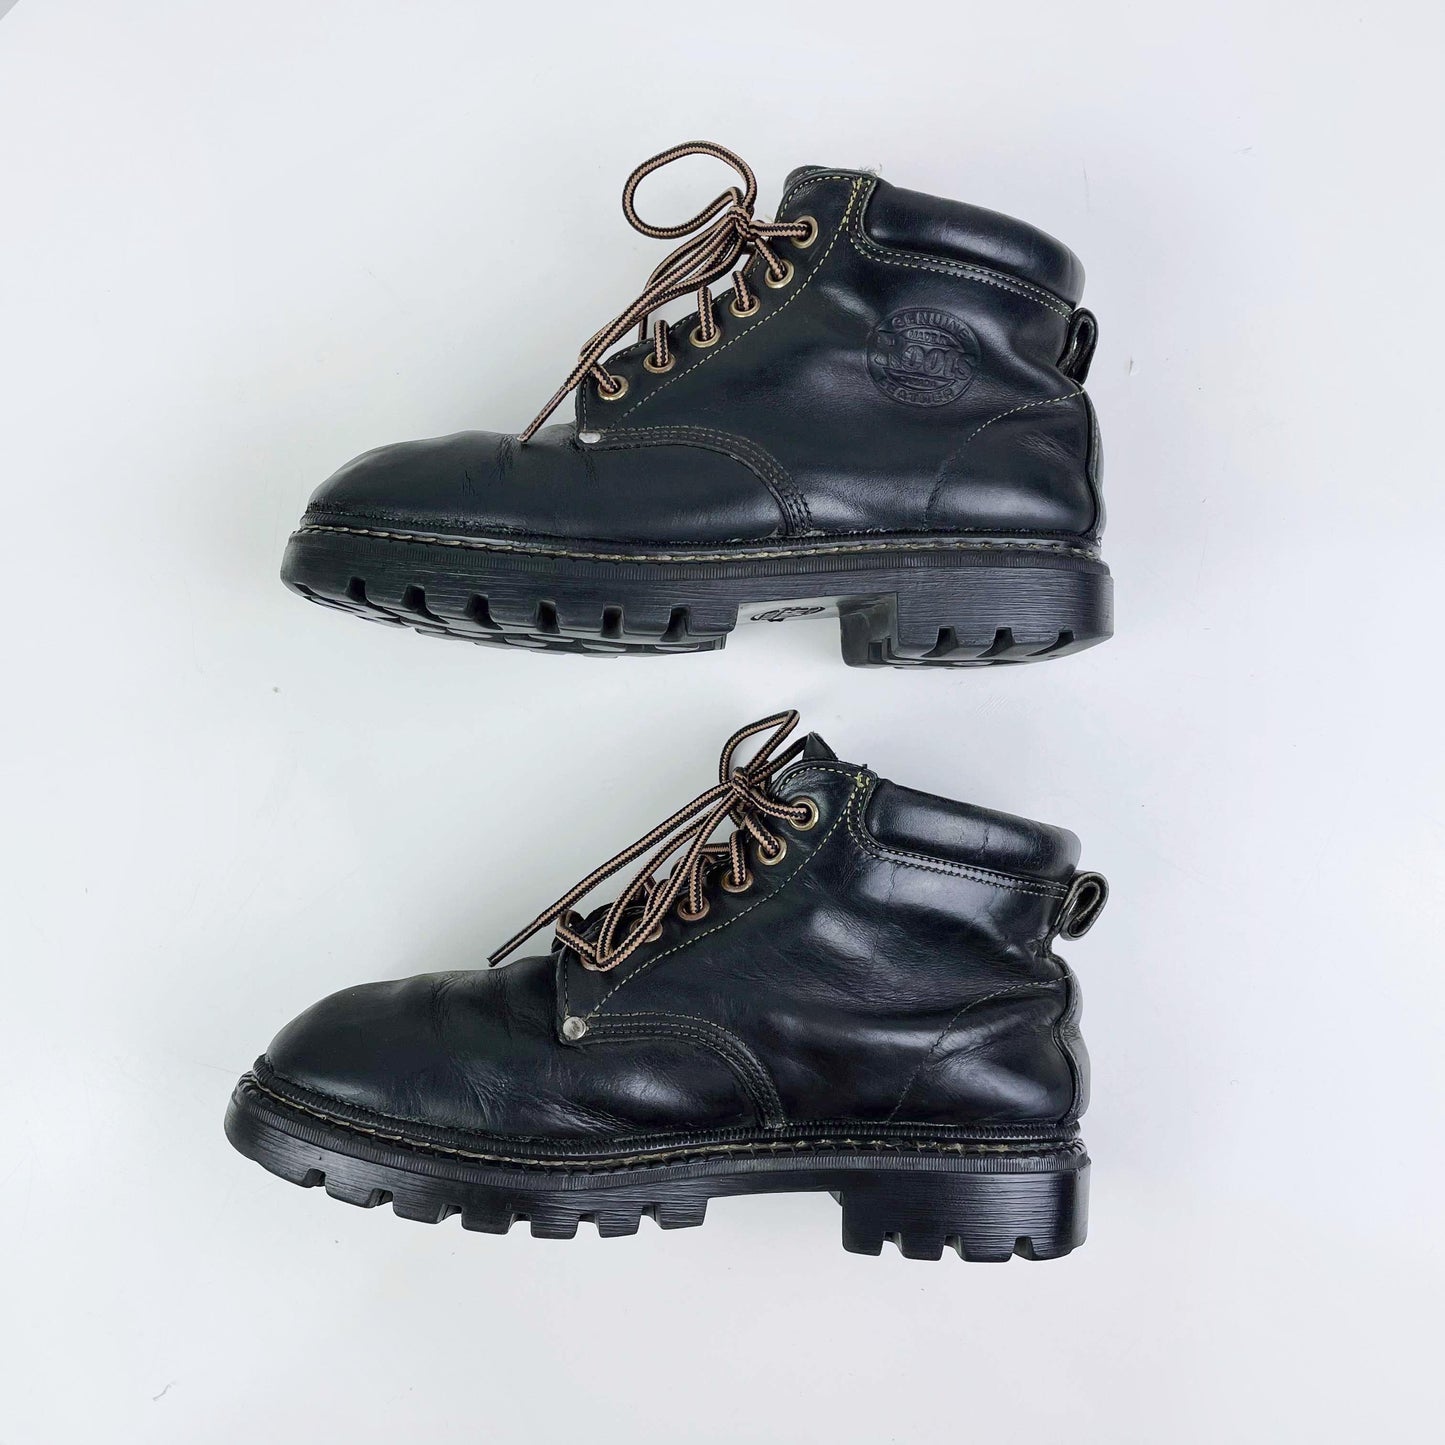 vintage 00s roots tuff leather hiking boots - size 6.5